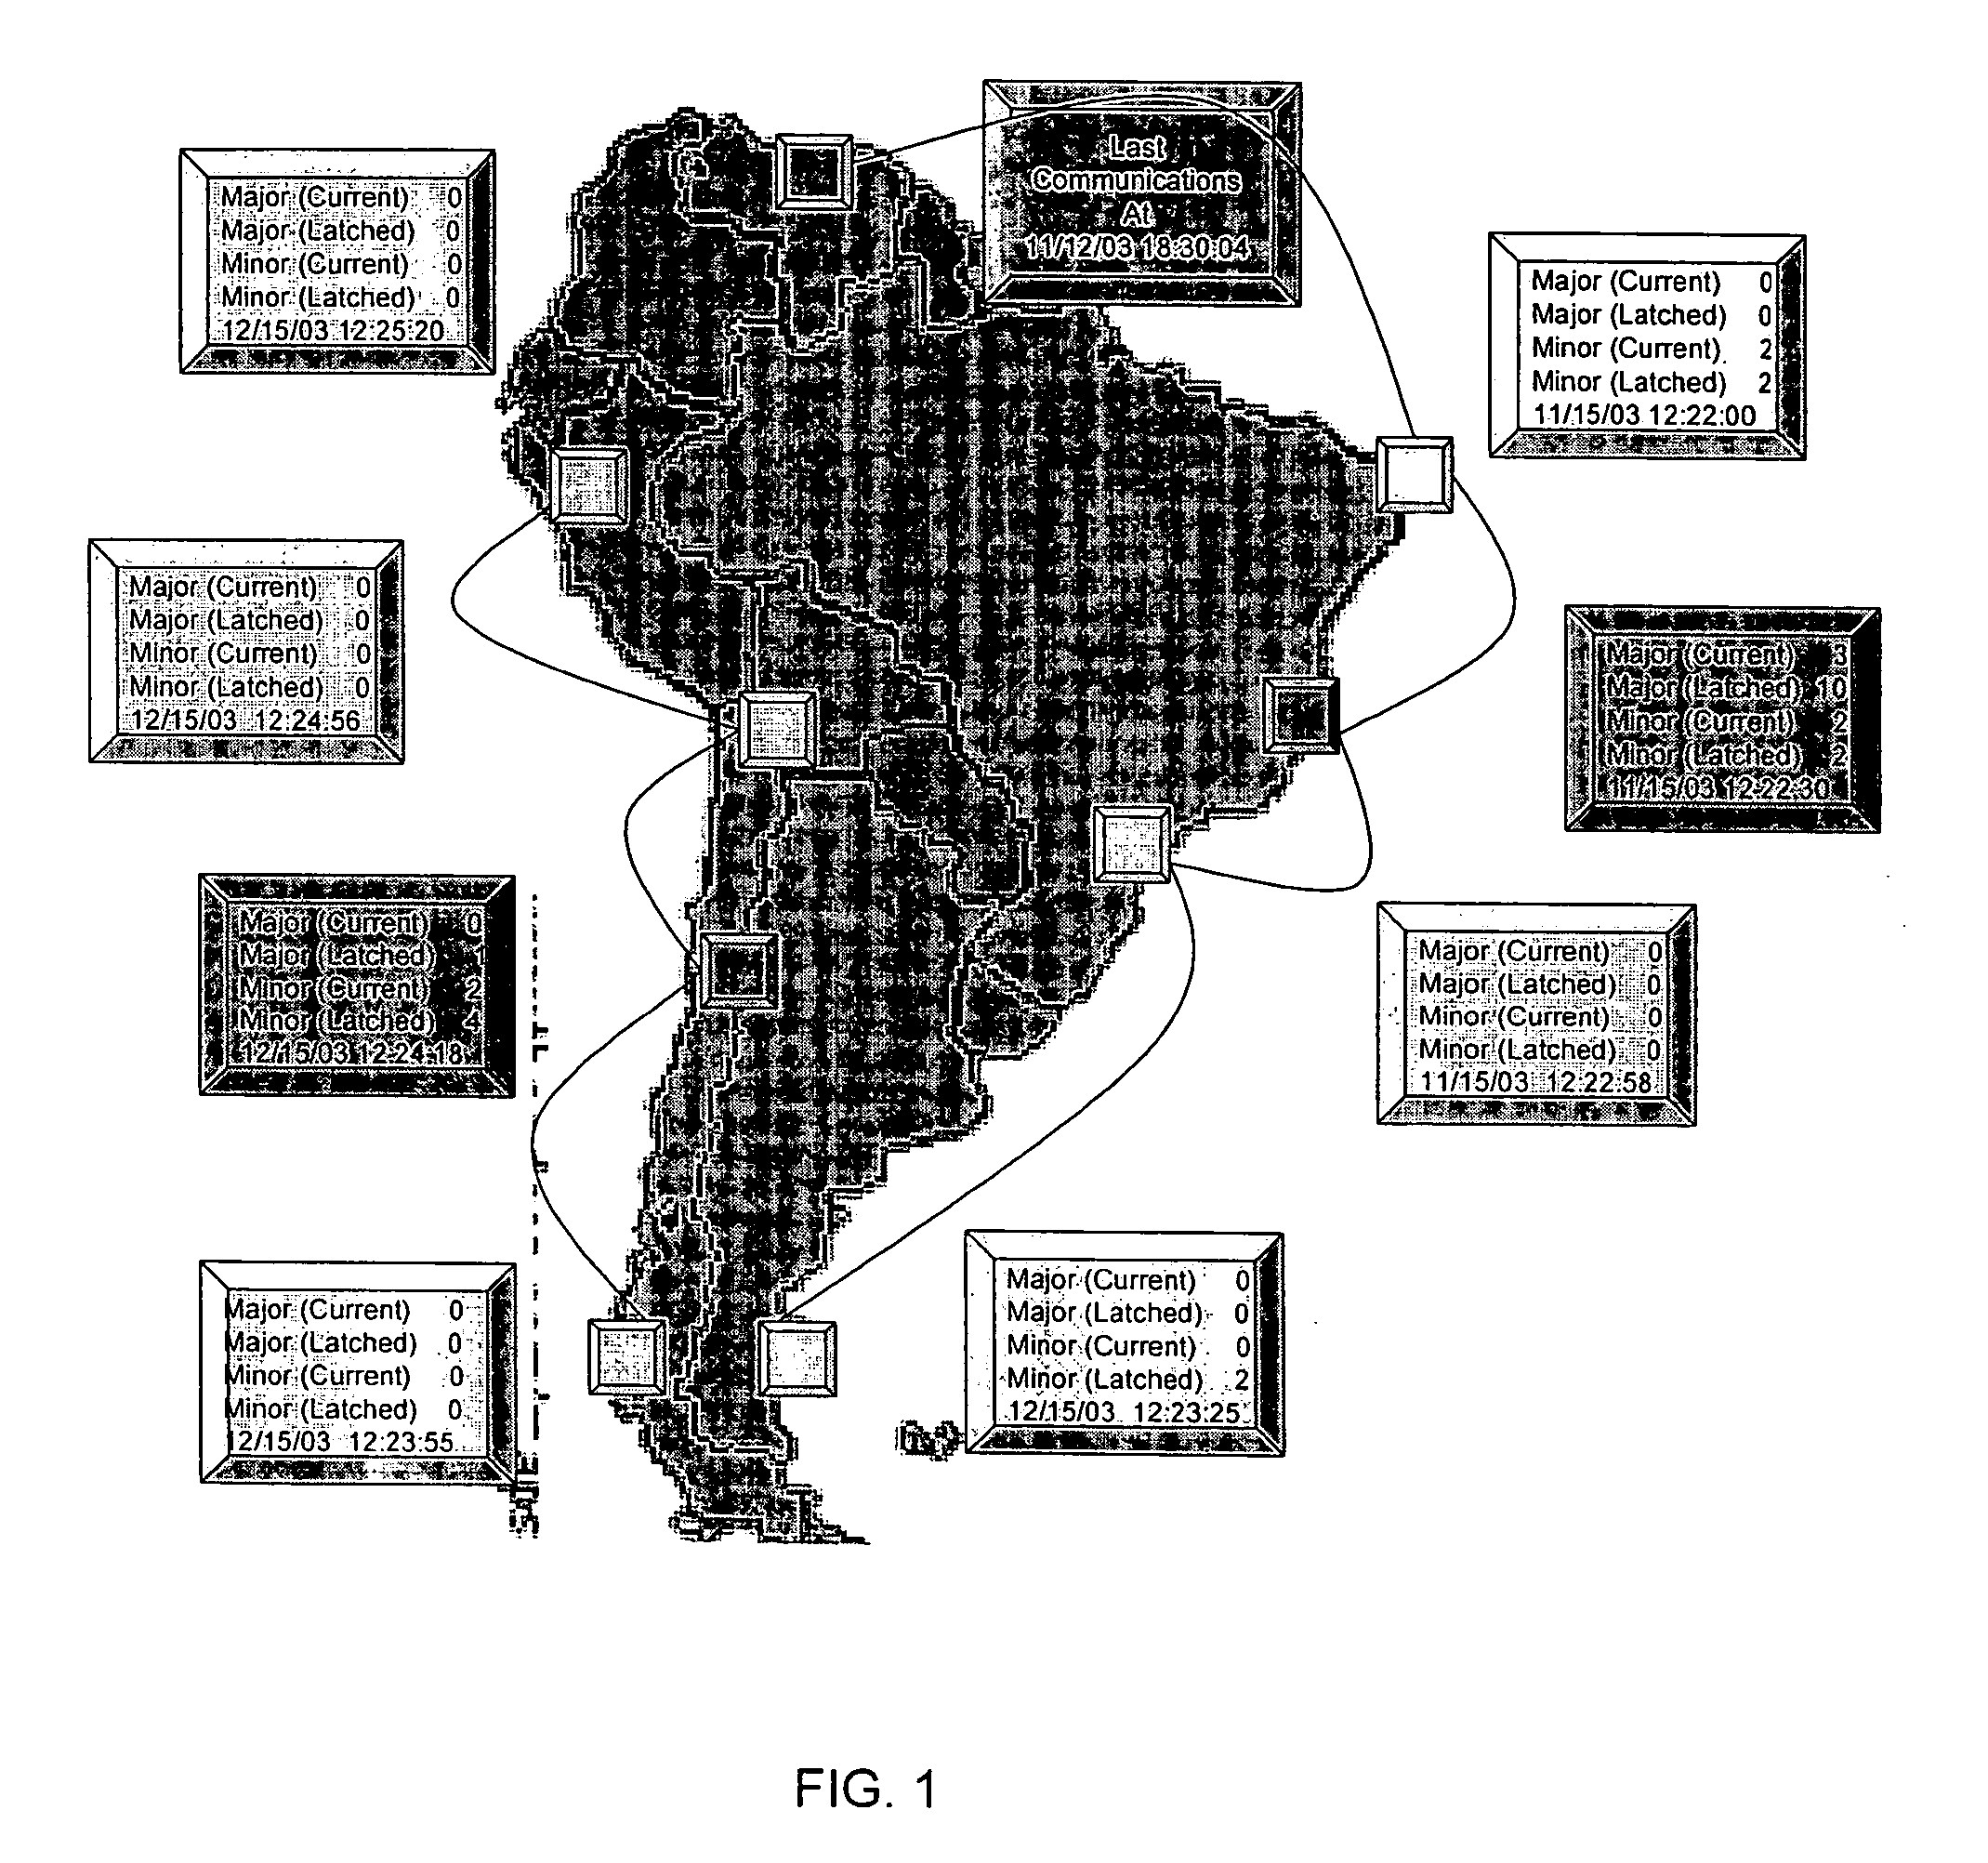 Distributed messaging system and method for sharing network status data